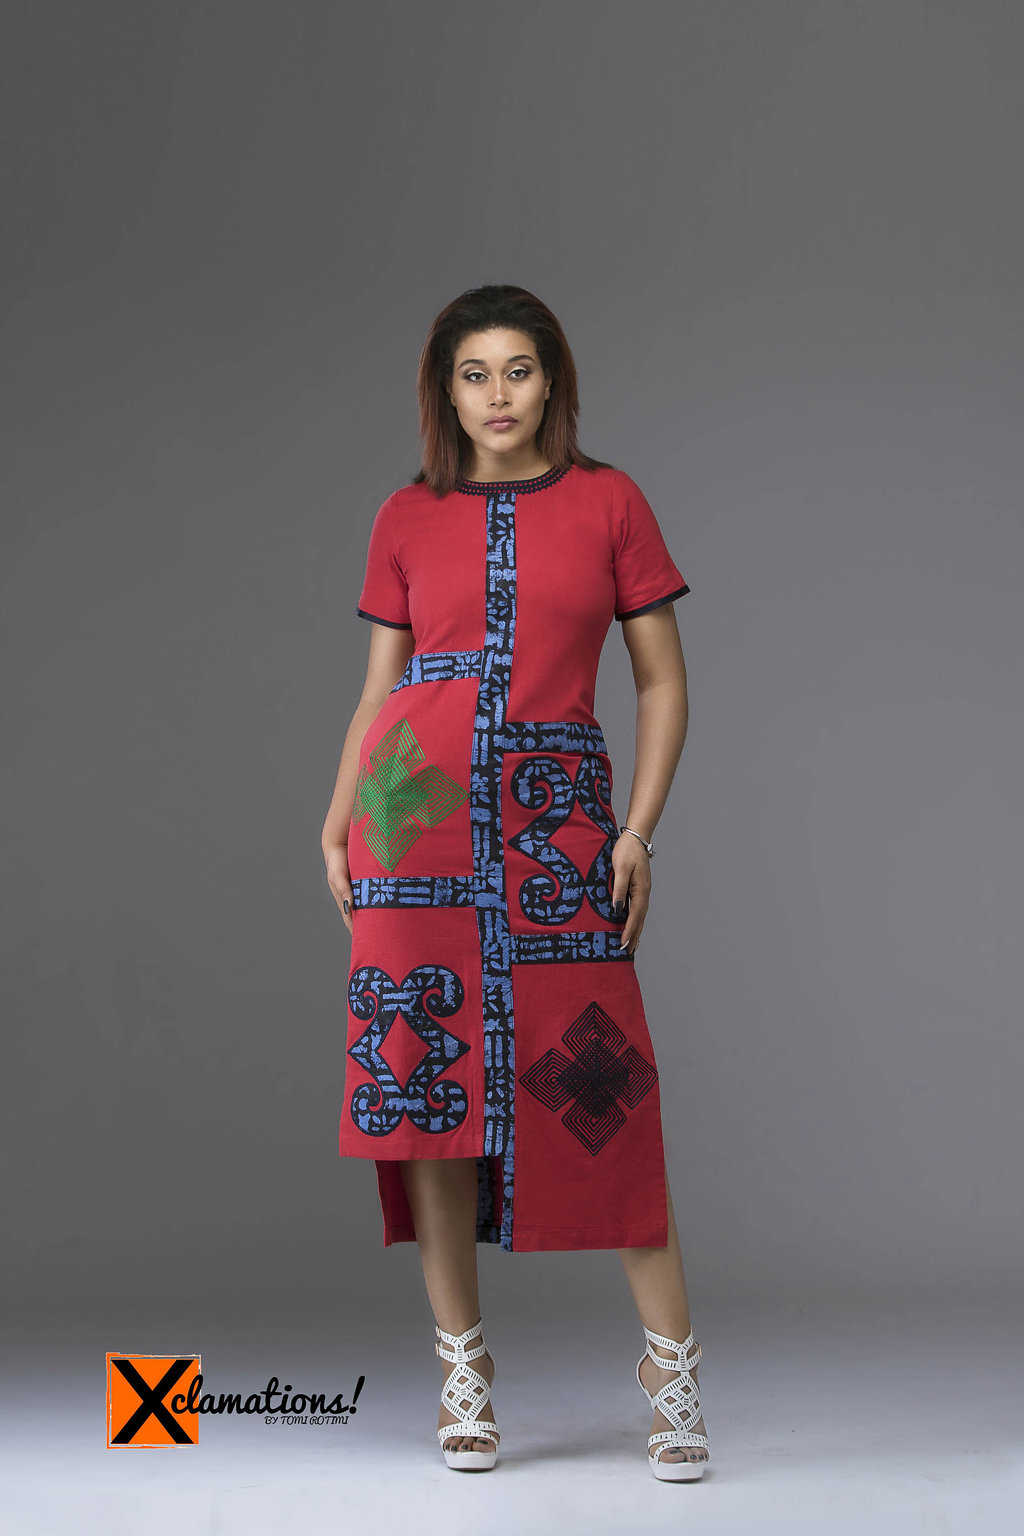 Nigerian Ready to Wear Brand Features Adunni Ade for its Summer Signatures Collection